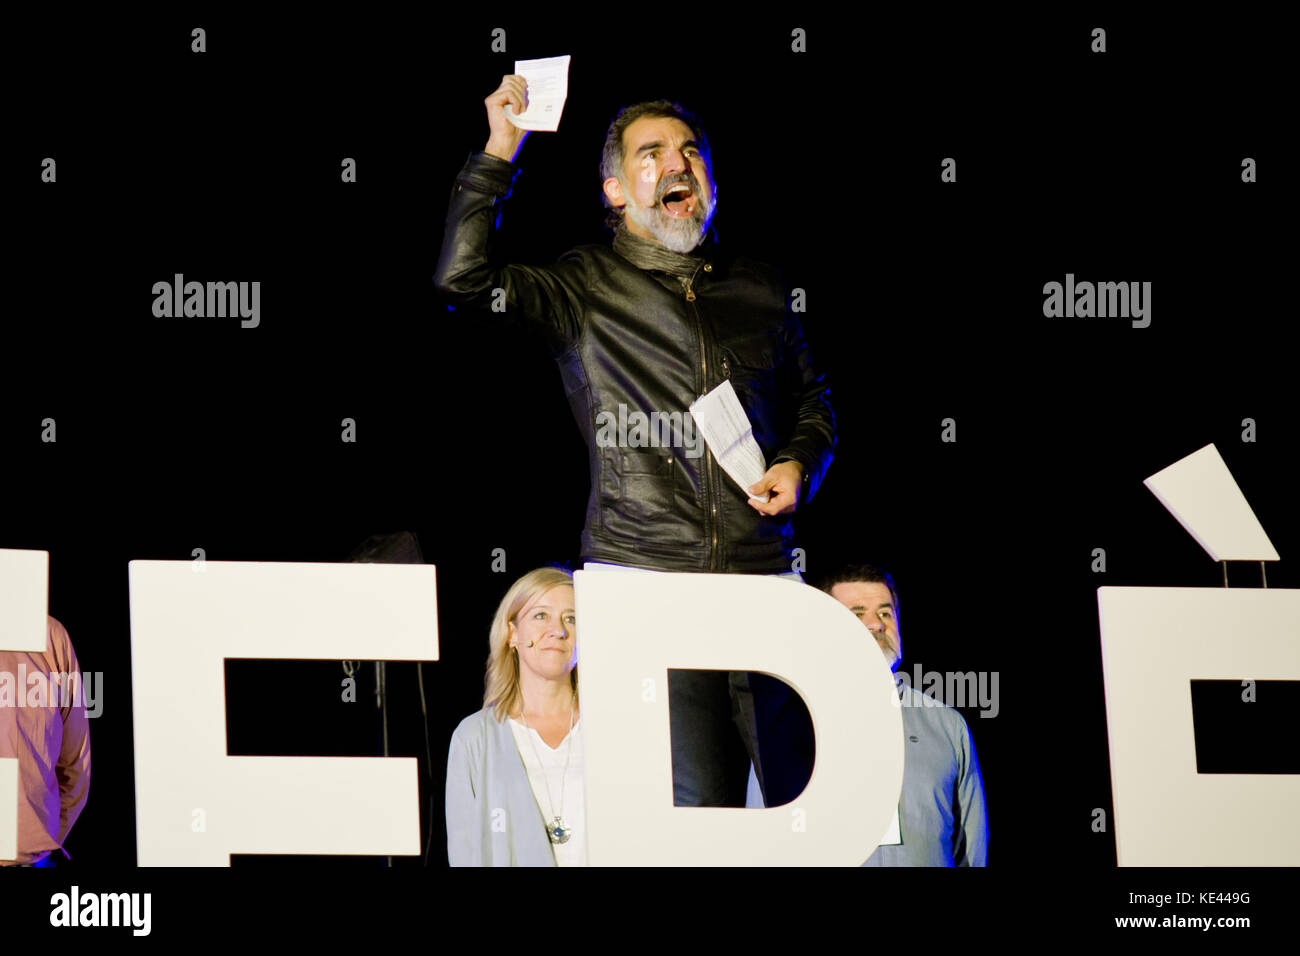 (File) In this image taken on September 29, 2017, leader of Omnium Cultural pro-independence organisation JORDI CUIXART shows a paper ballot  during the closing campaign meeting for the catalan independence referendum in Barcelona. Jordi Sánchez, who heads the Catalan National Assembly (ANC), and Jordi Cuixart, leader of Omnium Cultural, are being held without bail while they are under investigation for sedition. Stock Photo